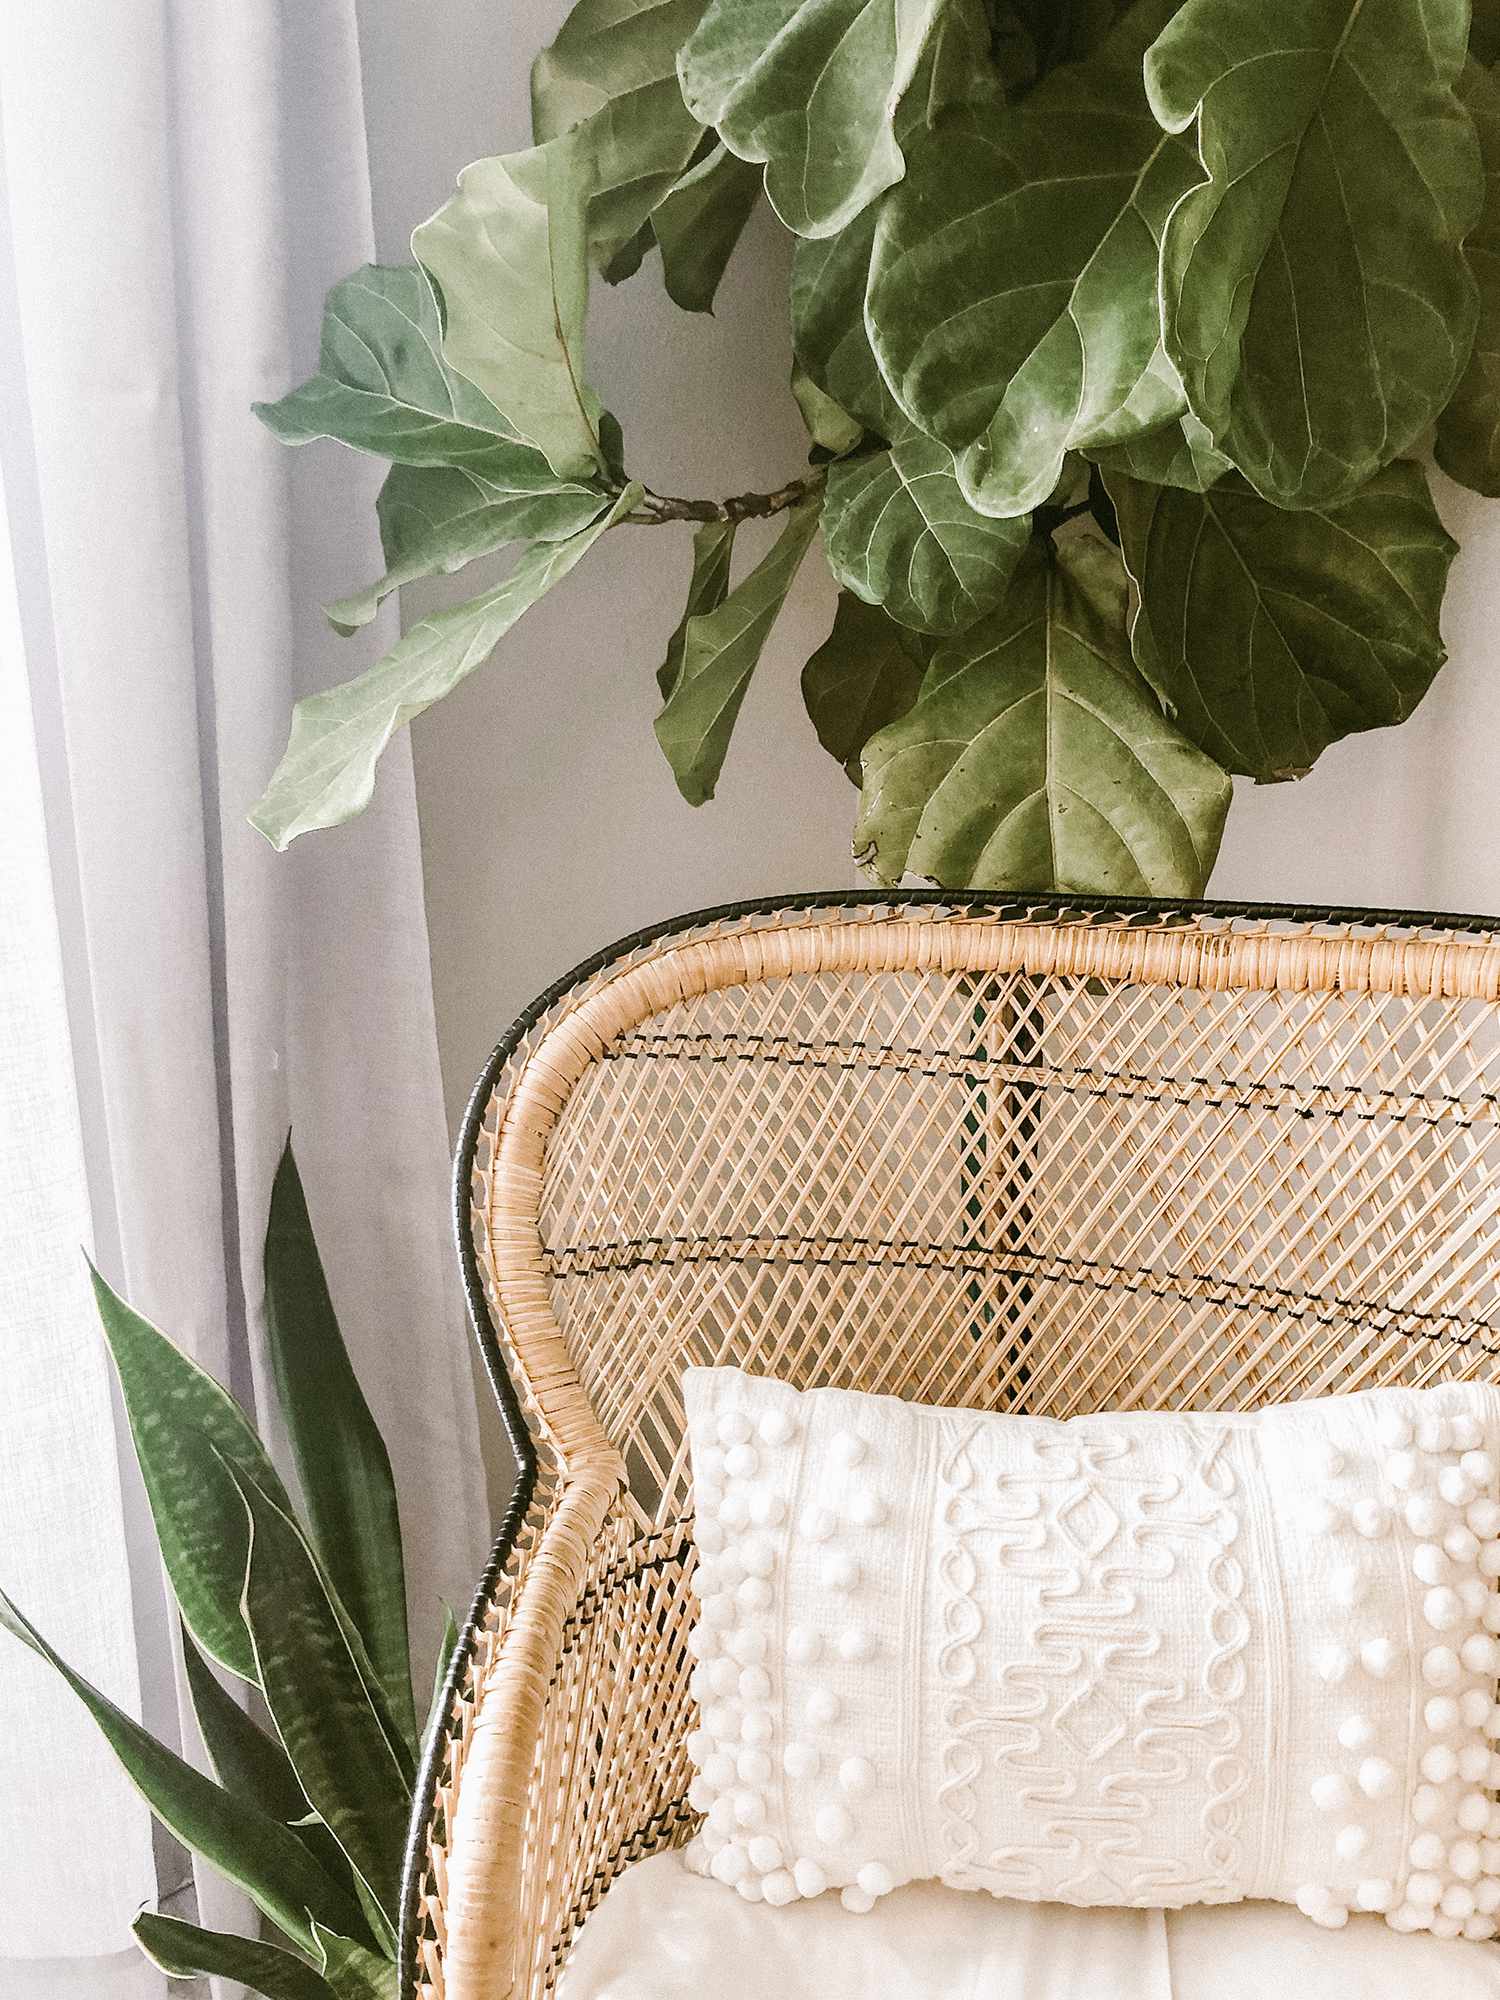 5 Reasons To Embrace Rattan This Spring/Summer Season